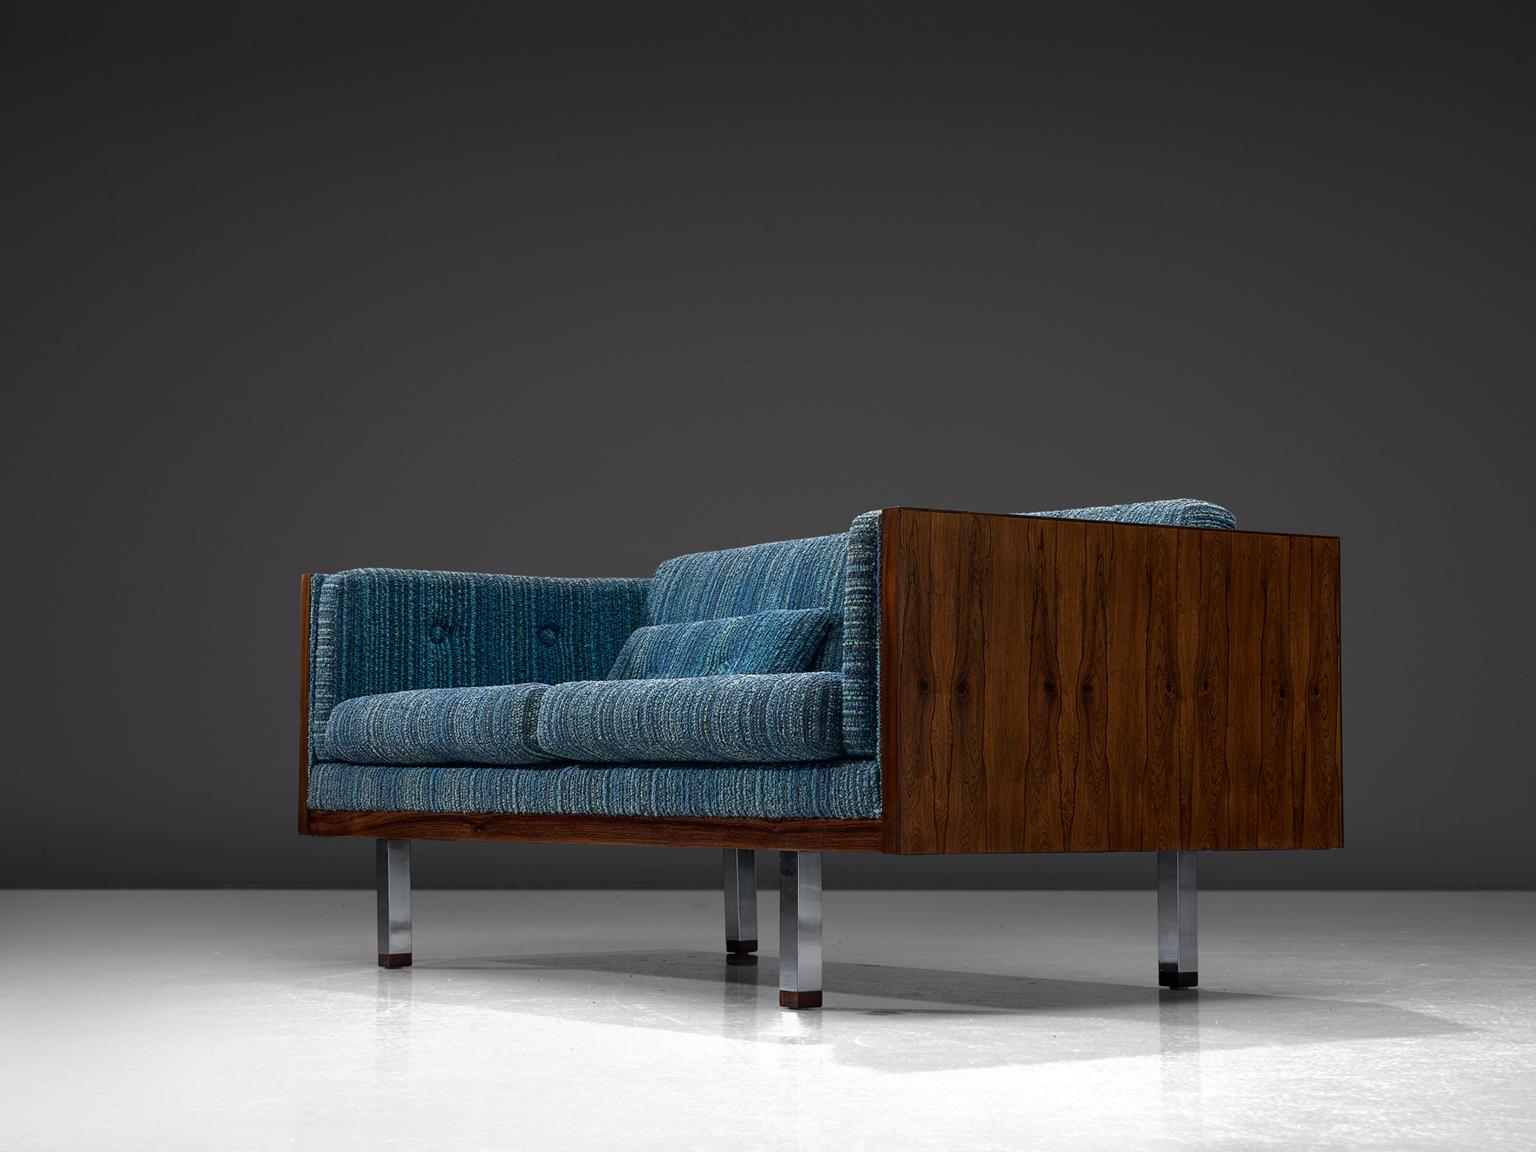 Jydsk Mobelvaerk, living room set, rosewood and blue upholstery, Denmark, 1960s. 

This living room set by Jydsk Mobelvaerk is made with rosewood sides doesn't go unnoticed, as it attracts attention due to it's blue upholstery. The rosewood frame